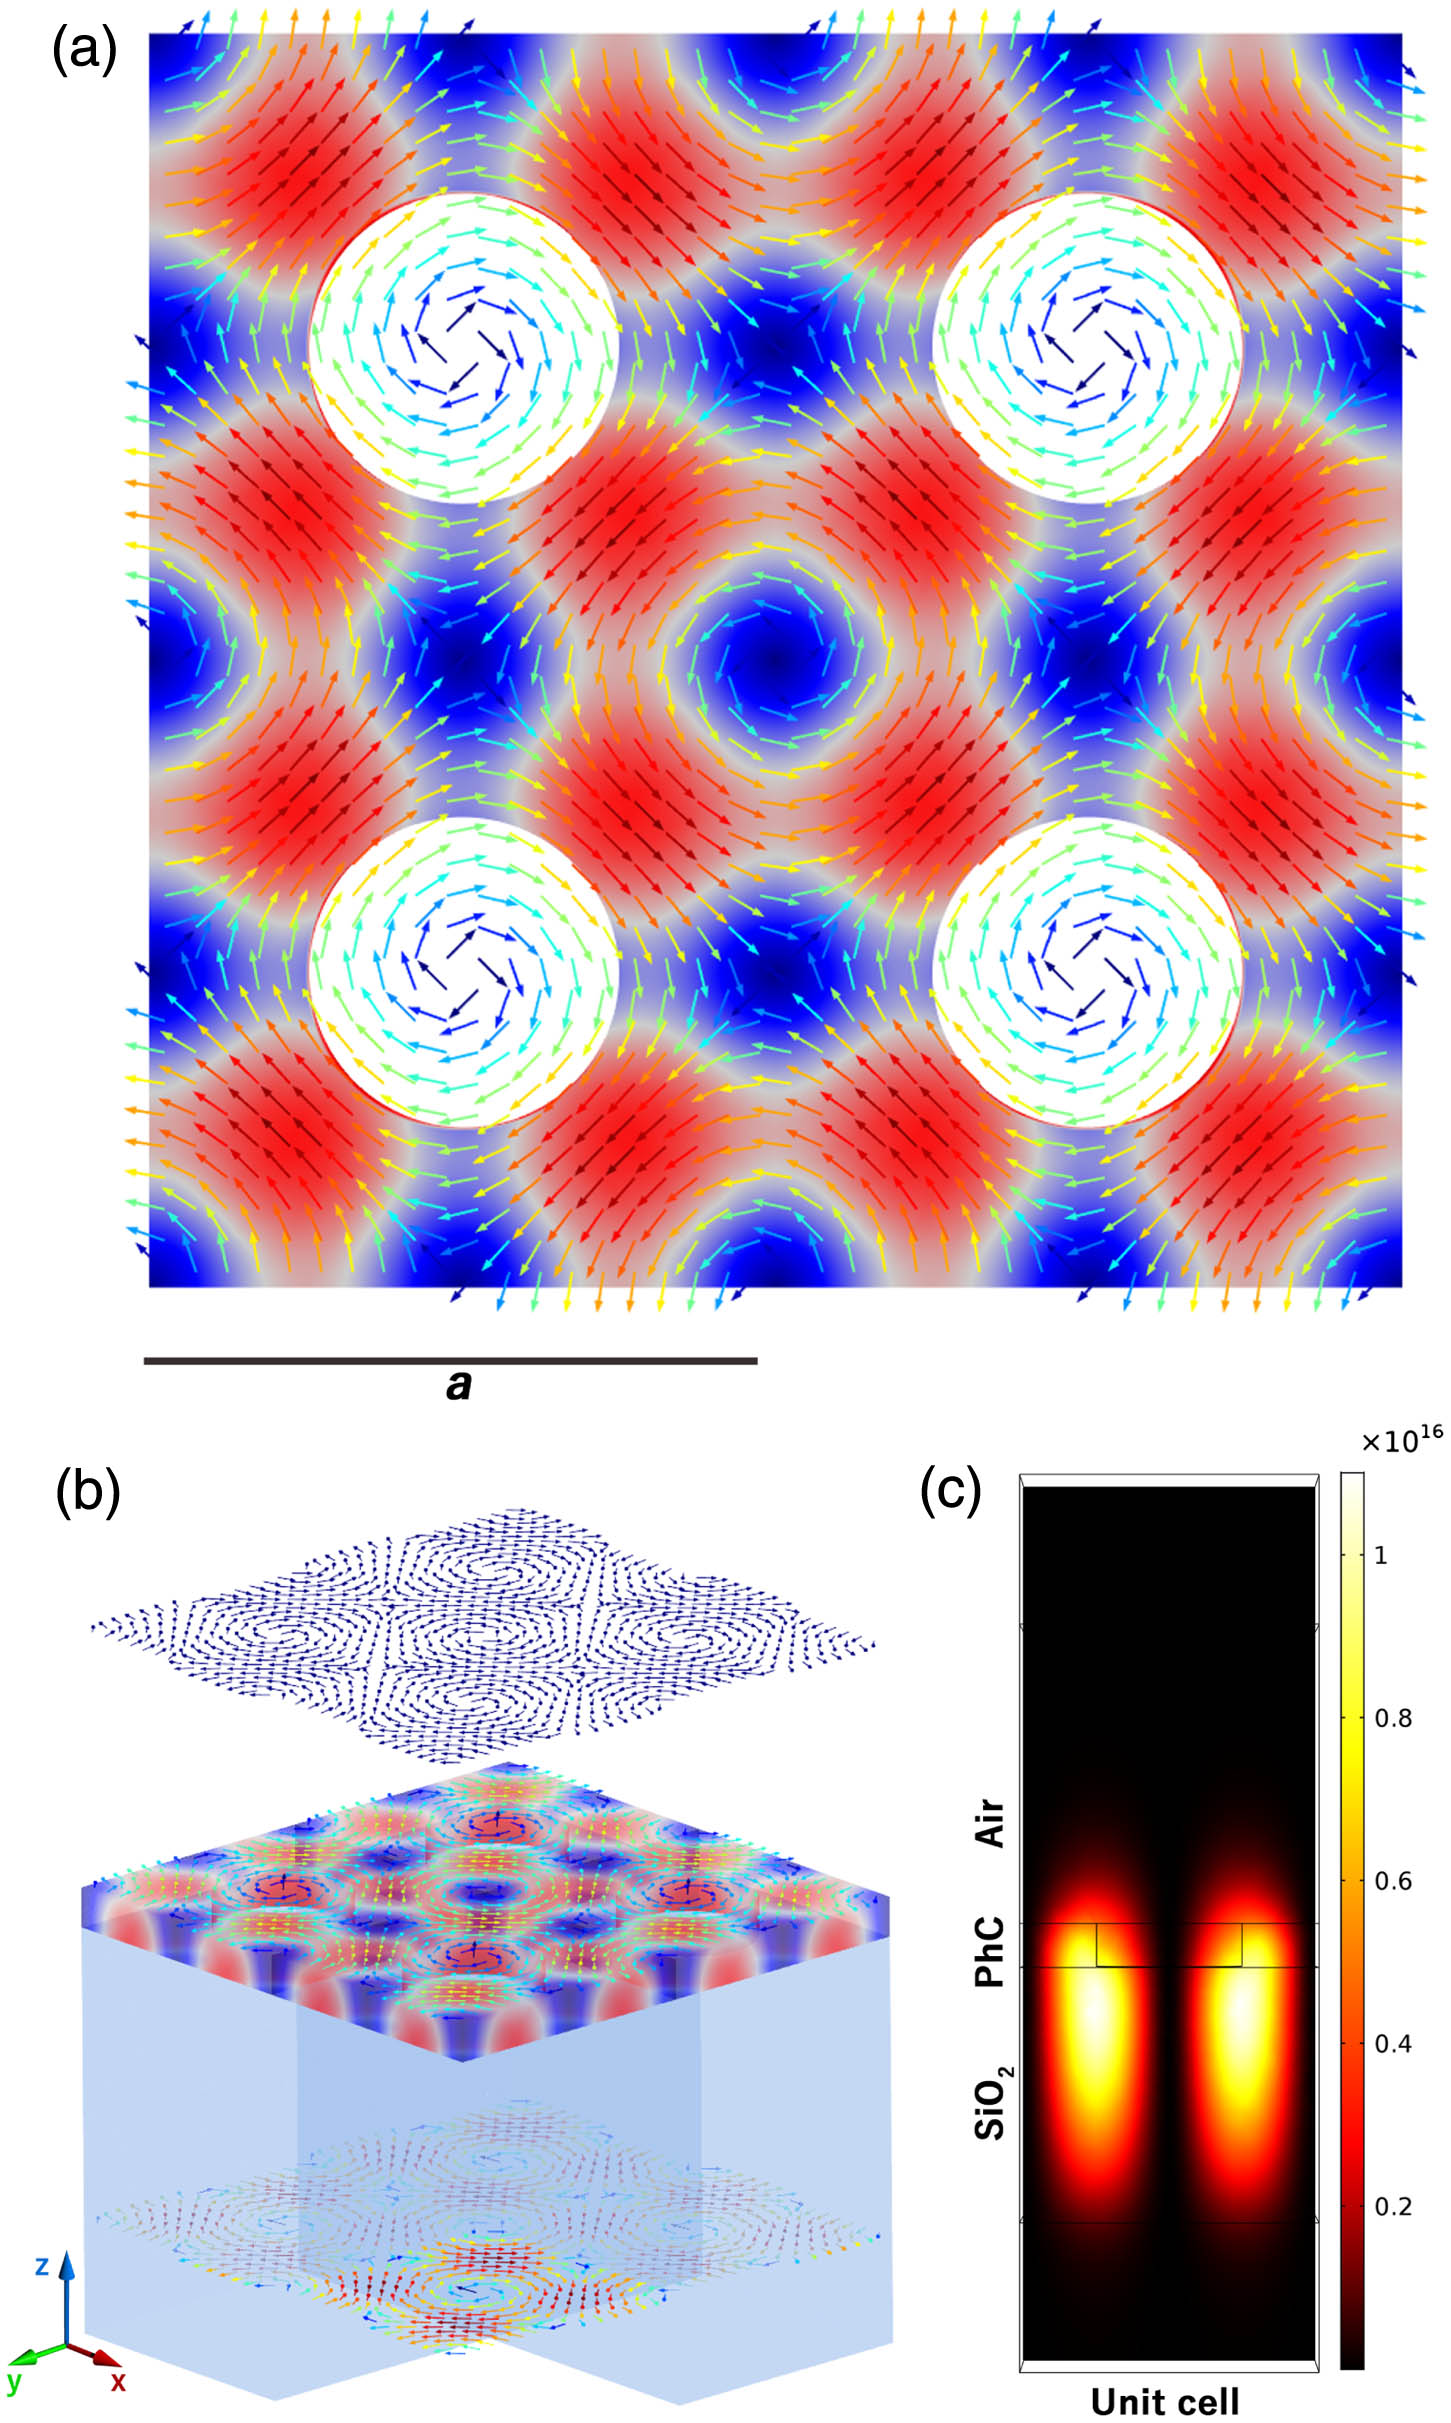 (a) Calculated electric field in resonance condition at the BIC mode at the Γ-point of the Brillouin zone; top view of four unit cells with lattice constant a. (b) BIC amplitude over the PhCM with superimposed arrow maps of the electric field; as clearly visible, the electric field forms a lattice of vortices and antivortices that cannot couple to radiating waves, revealing the bound-in-the-continuum character of the calculated mode. (c) Intensity profile of the electric field (side view of one unit cell) showing that the BIC wave is mostly confined at the interface Si3N4/SiO2, but the electromagnetic field enhancement at Si3N4/air interface is expected to be large enough to provide strong light–matter interaction. Intensity enhancement of the simulation diverges in agreement with an ideal diverging Q-factor of an infinite structure.